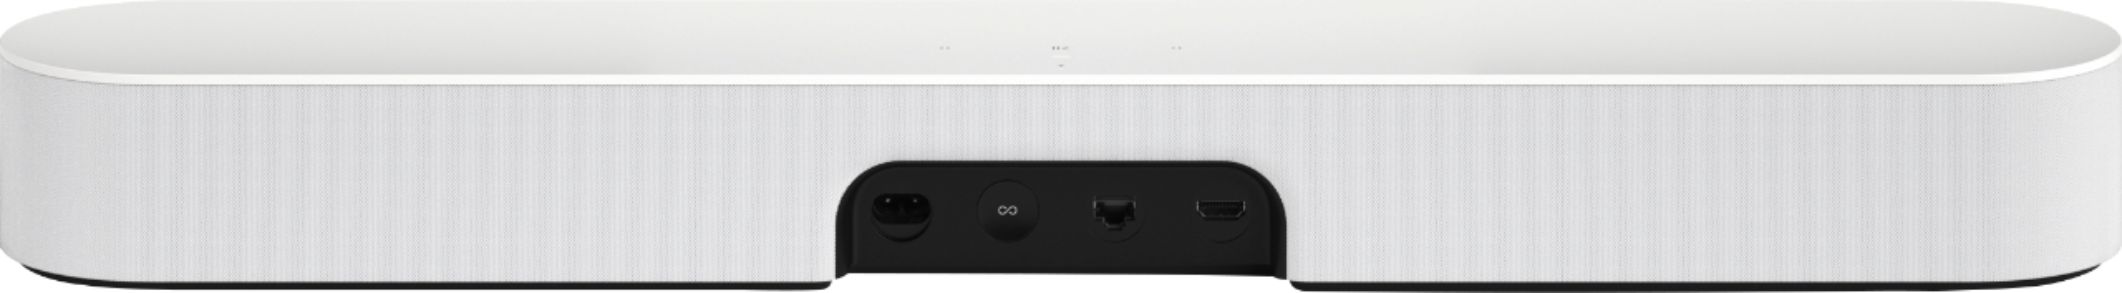 Back View: Sonos - Beam Soundbar with Voice Control built-in - White